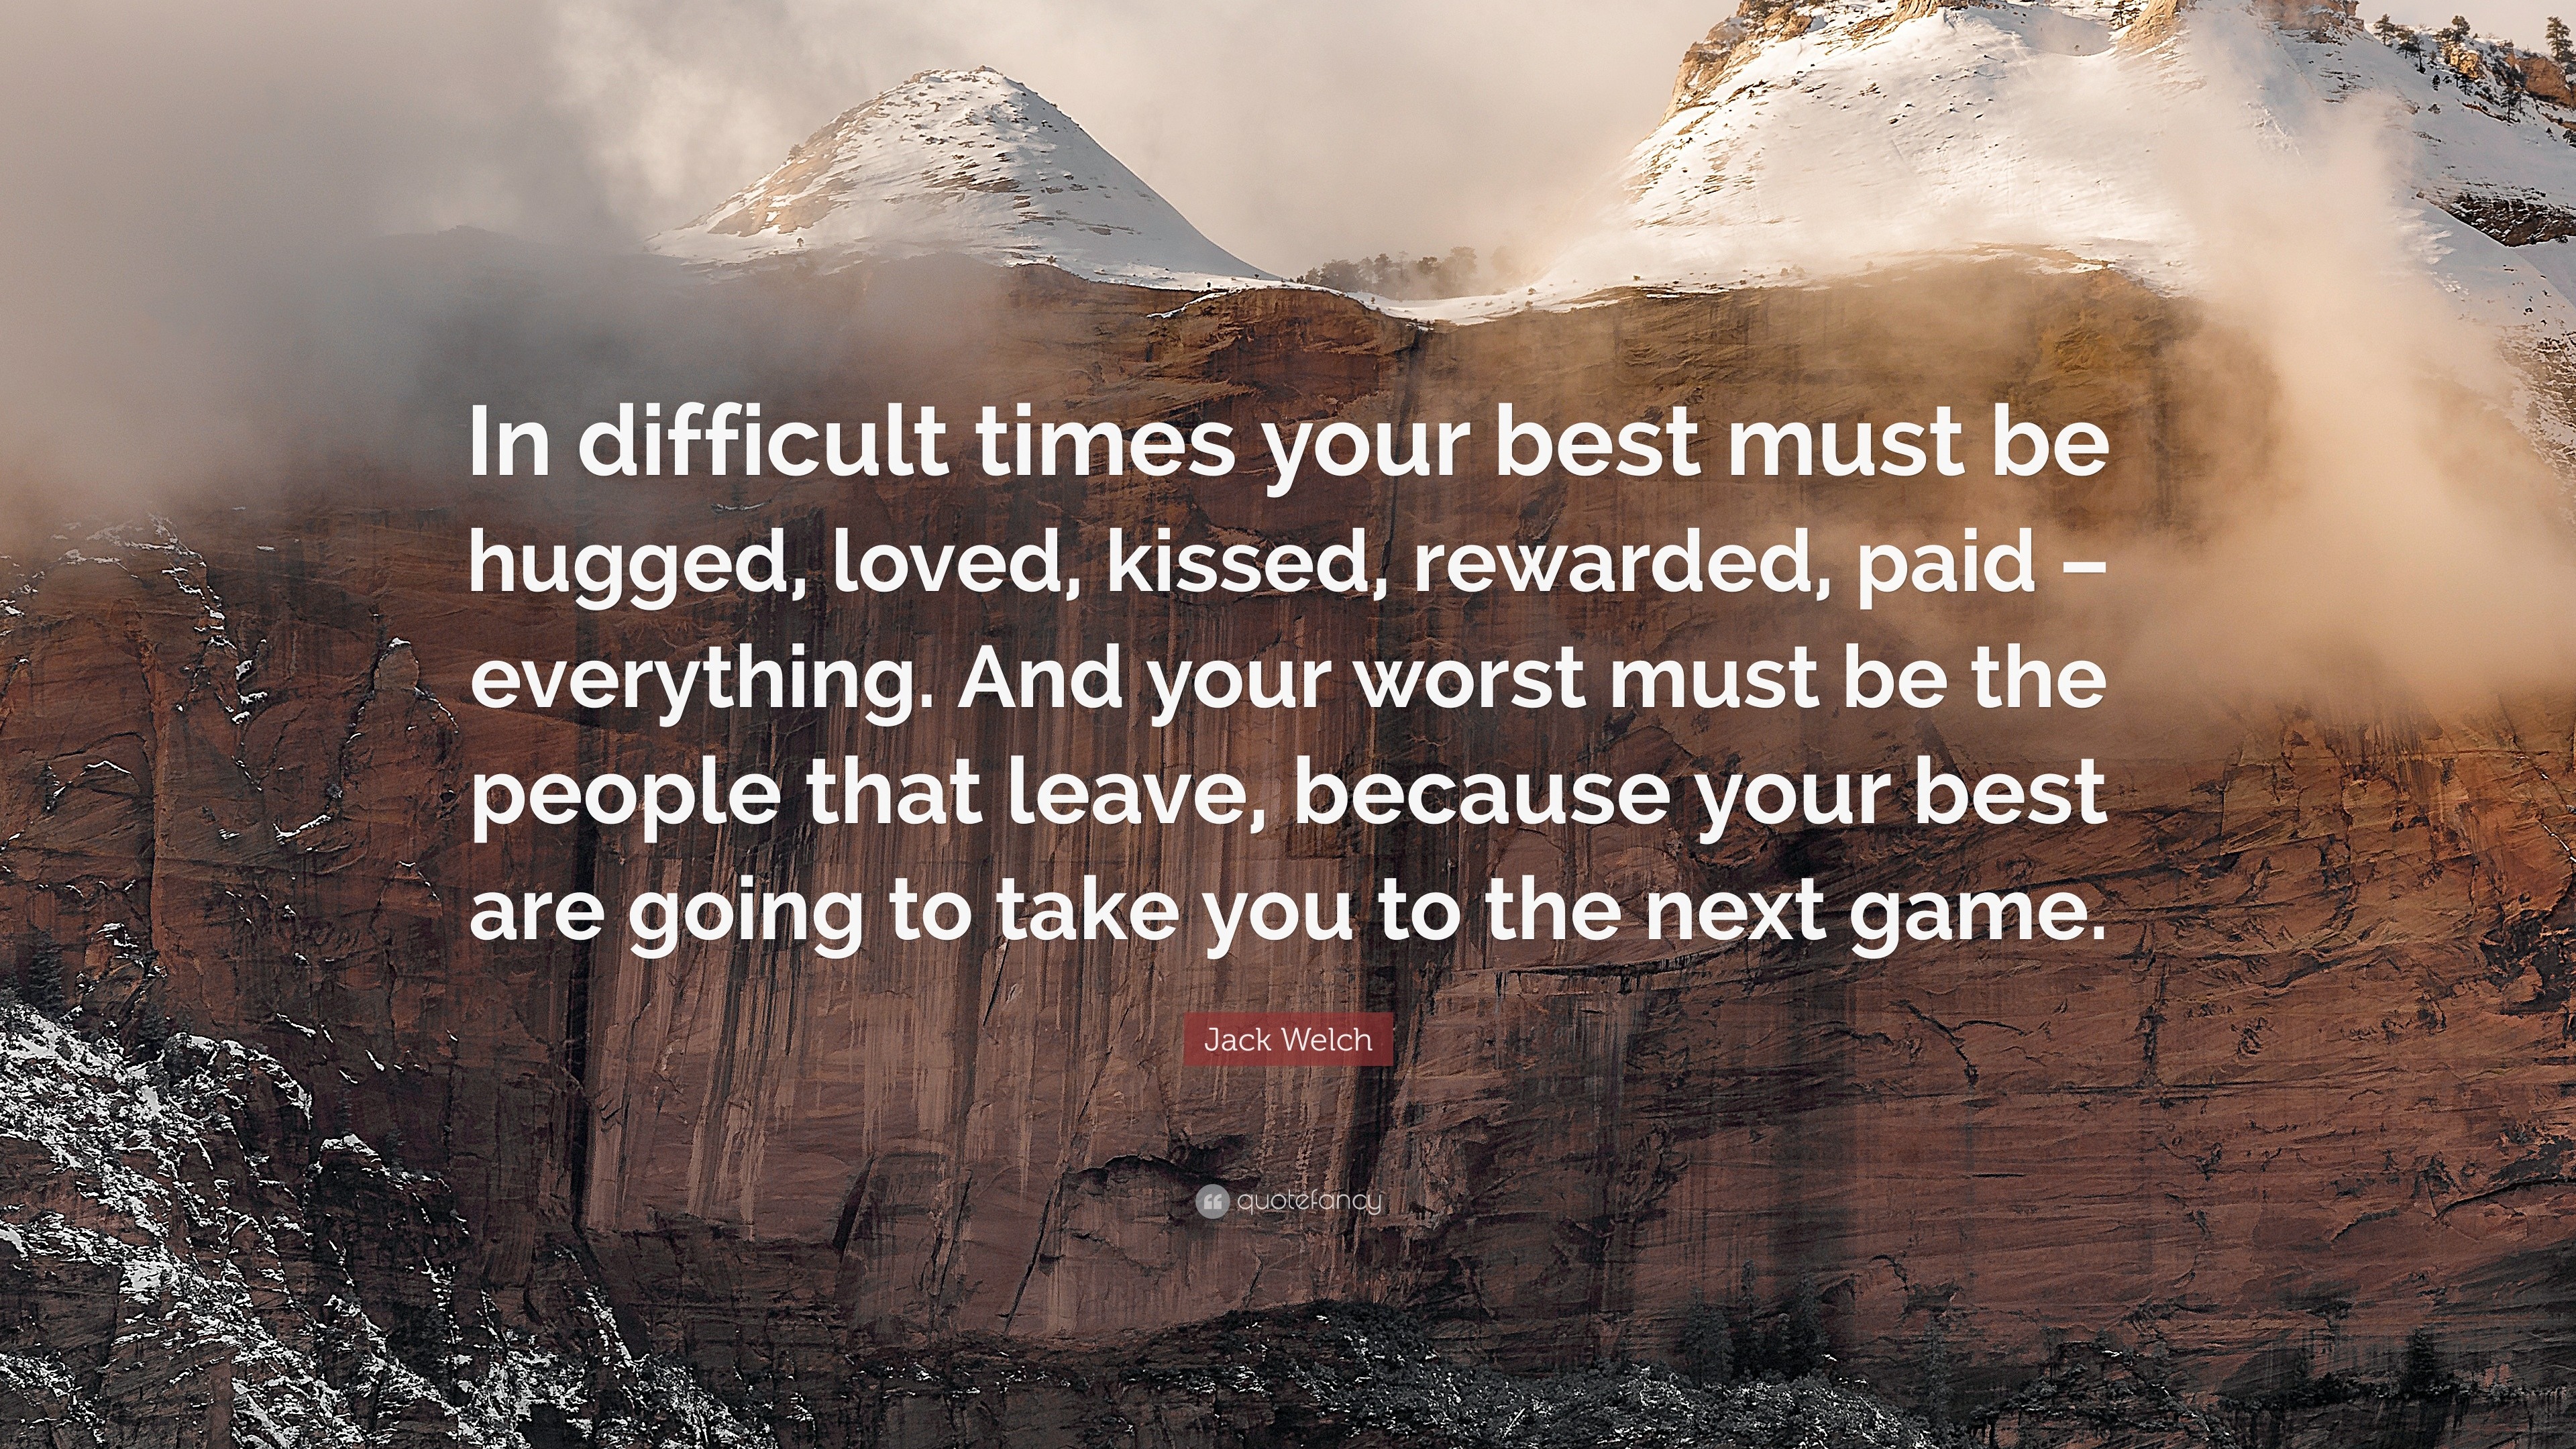 Jack Welch Quote “In difficult times your best must be hugged loved